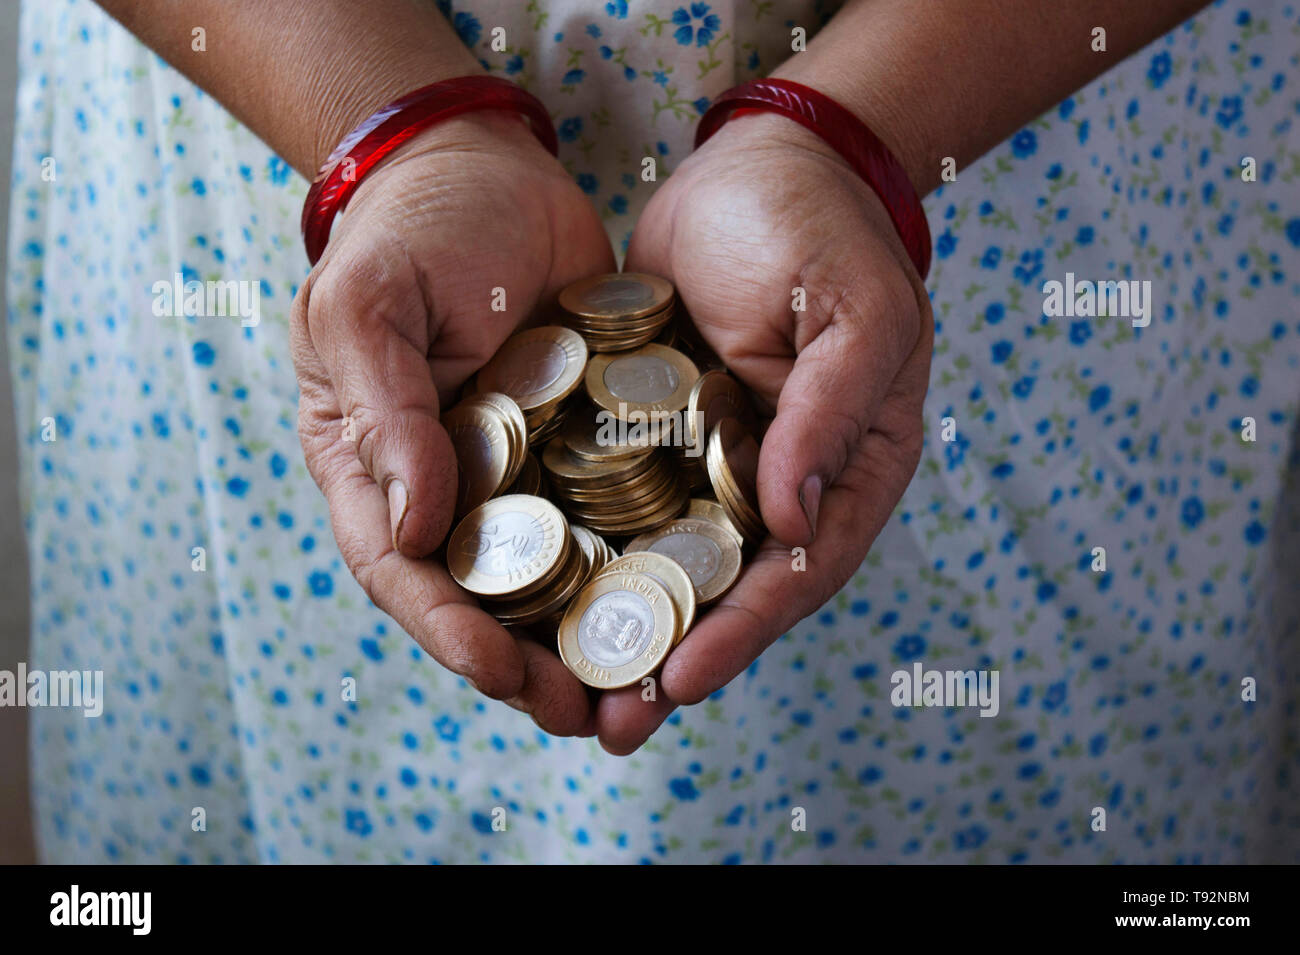 Hands holding 10 rupee coins. Stock Photo